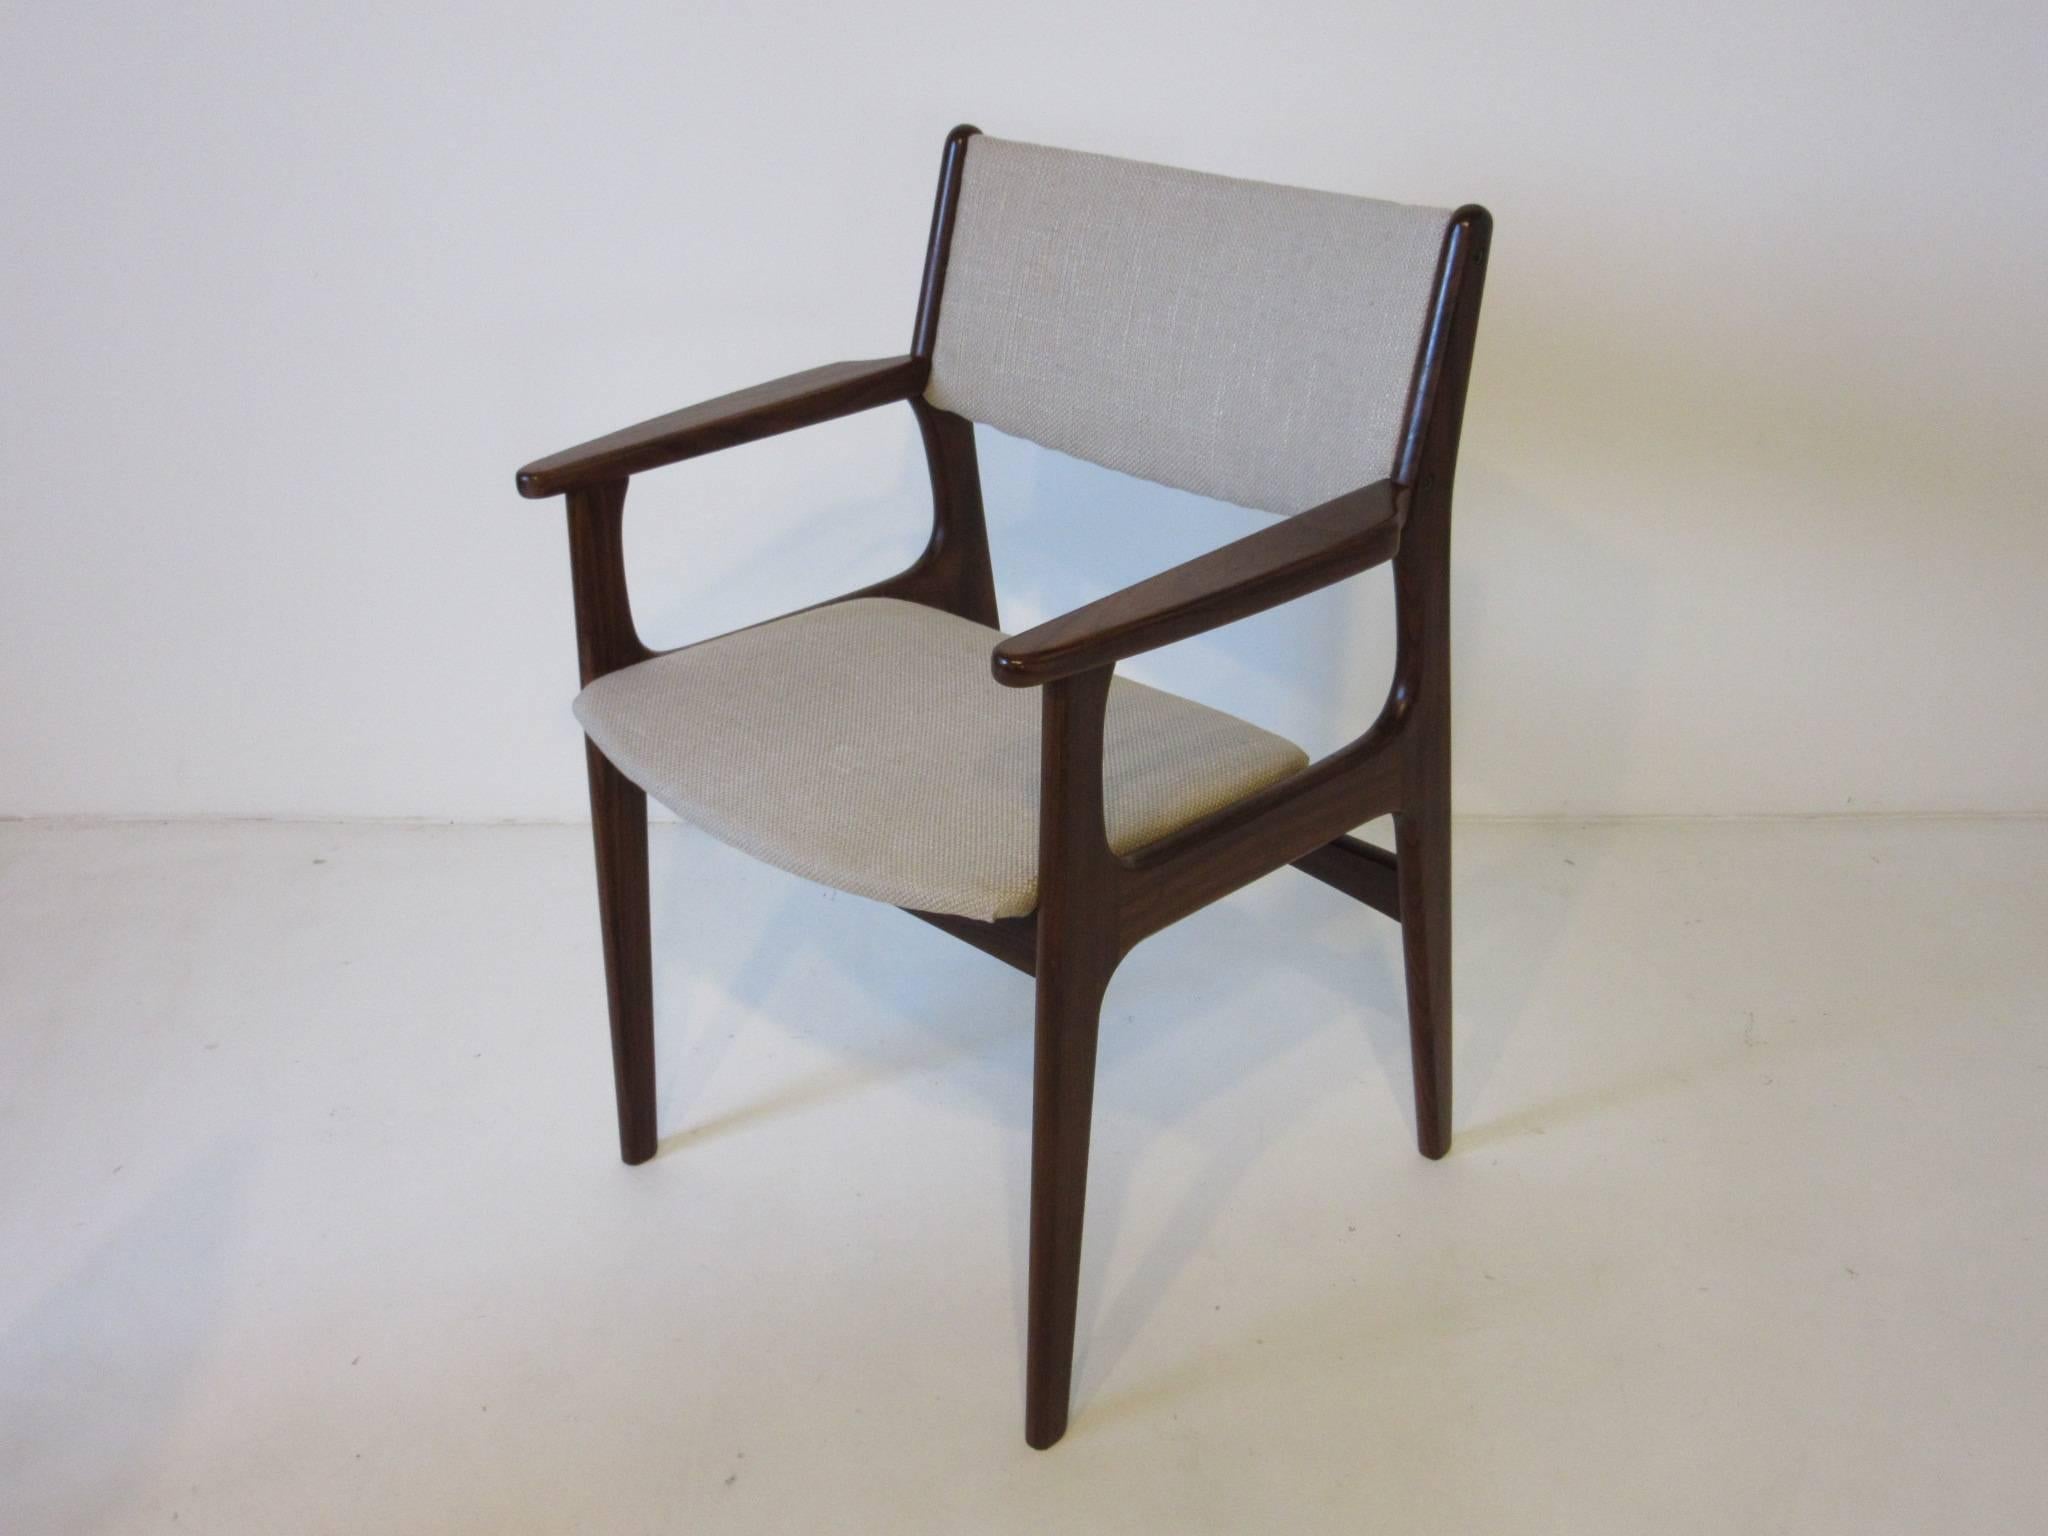 A set of four dark wood framed dining chairs with oatmeal toned fabric, two arm chairs and two side chairs complete the set, made in Denmark by Odense Mobel Fabrik. The side chair measurements are 19